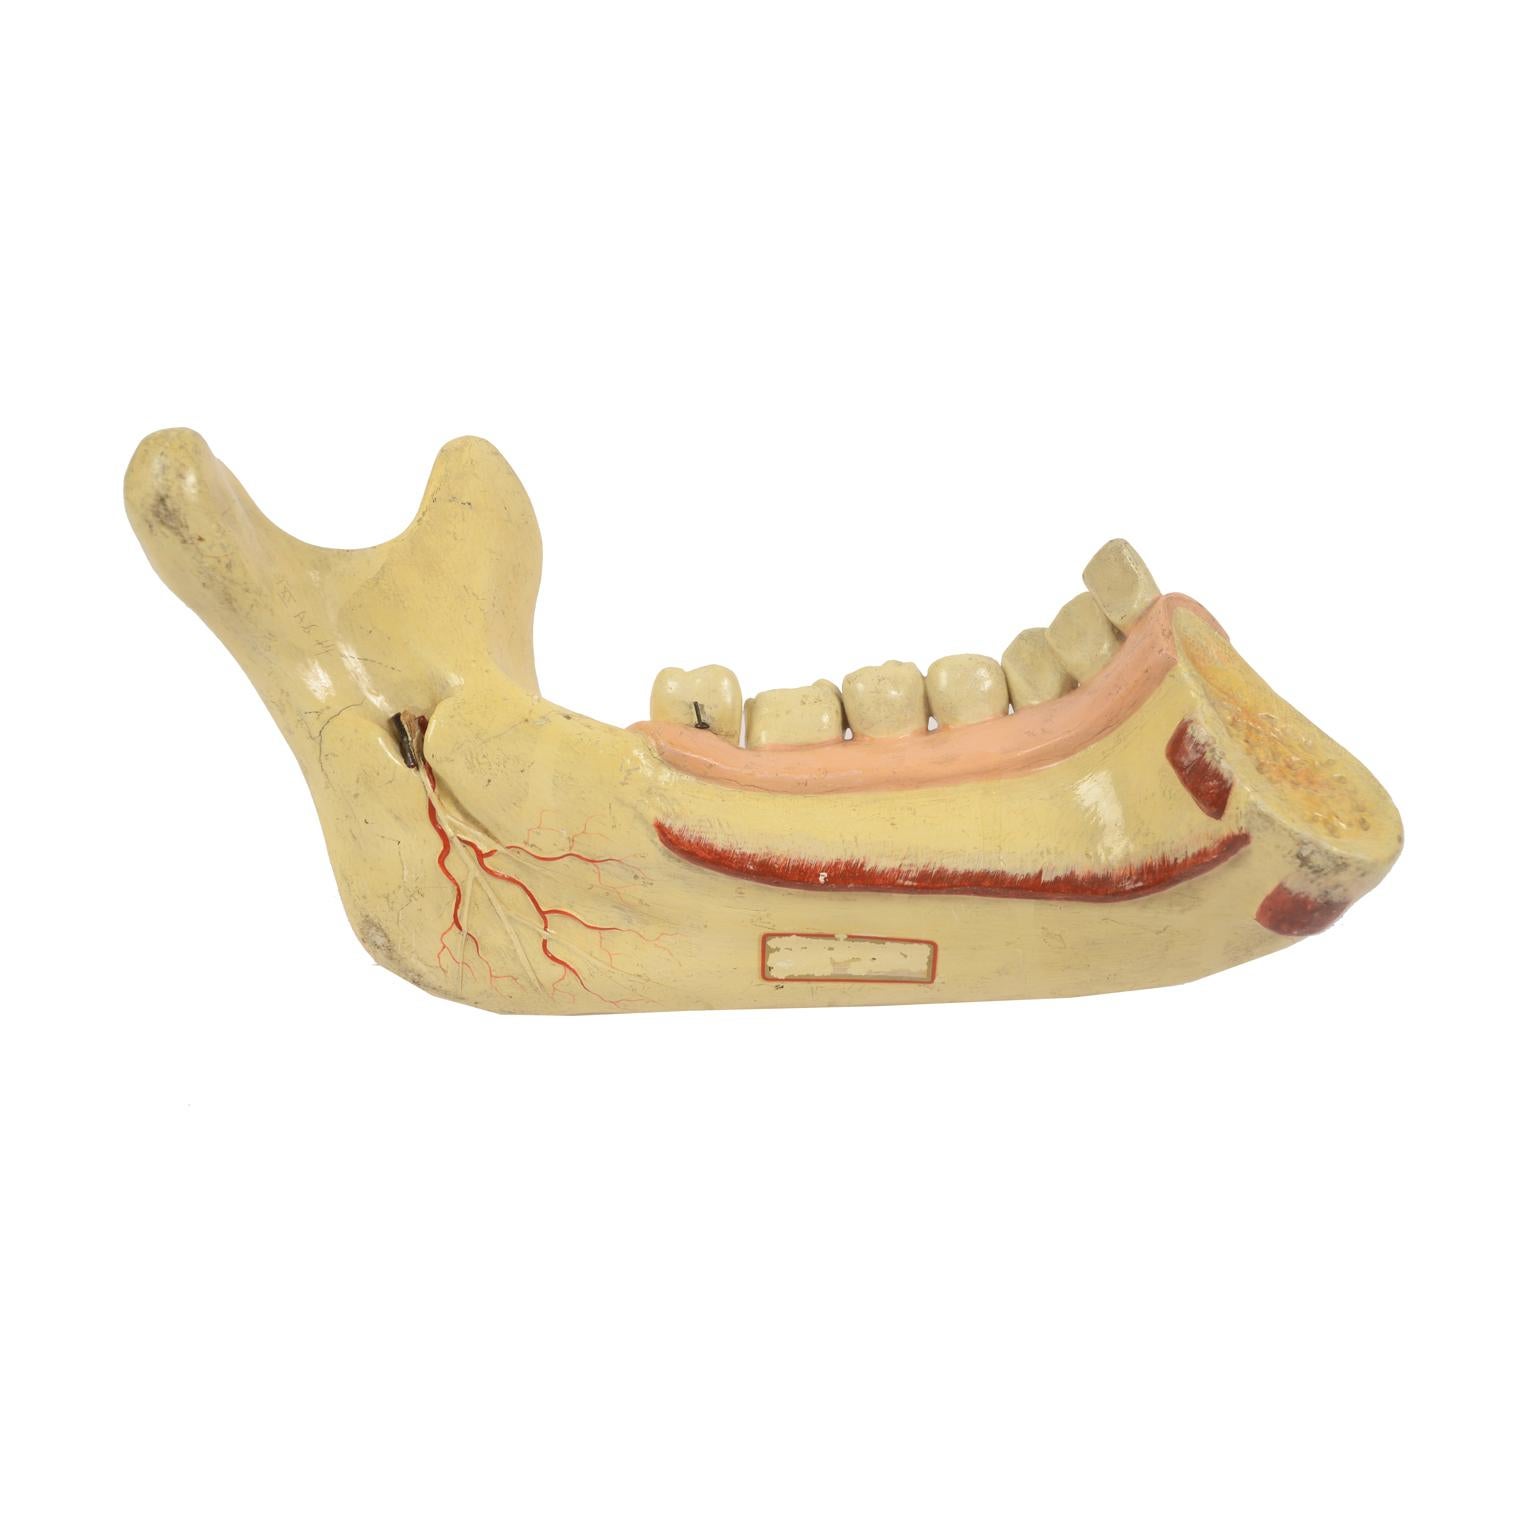 Didactic anatomical model of an enlarged mandible, made of polychrome papier mâché and plaster. A flap fixed with two hooks shows the complete section of the dentition up to the roots, in evidence the circulatory system, the roots and two caries, a